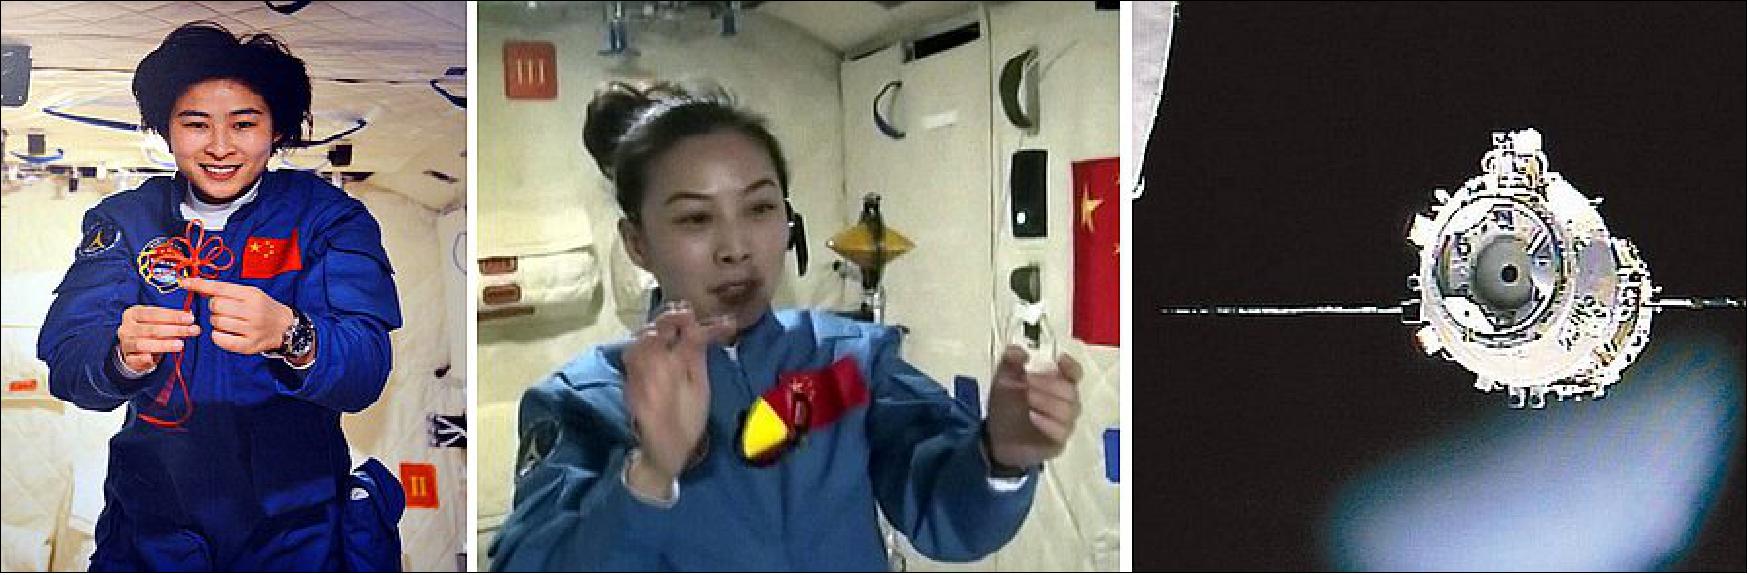 Figure 104: Left: Liu, China's first woman in space, aboard the Tiangong-1 space station. Middle: Wang teaching a physics lesson live from Tiangong-1. Right: The Tiangong-1 space station as seen during the approach by the Shenzhou 9 spacecraft (image credit: NASA/JSC)